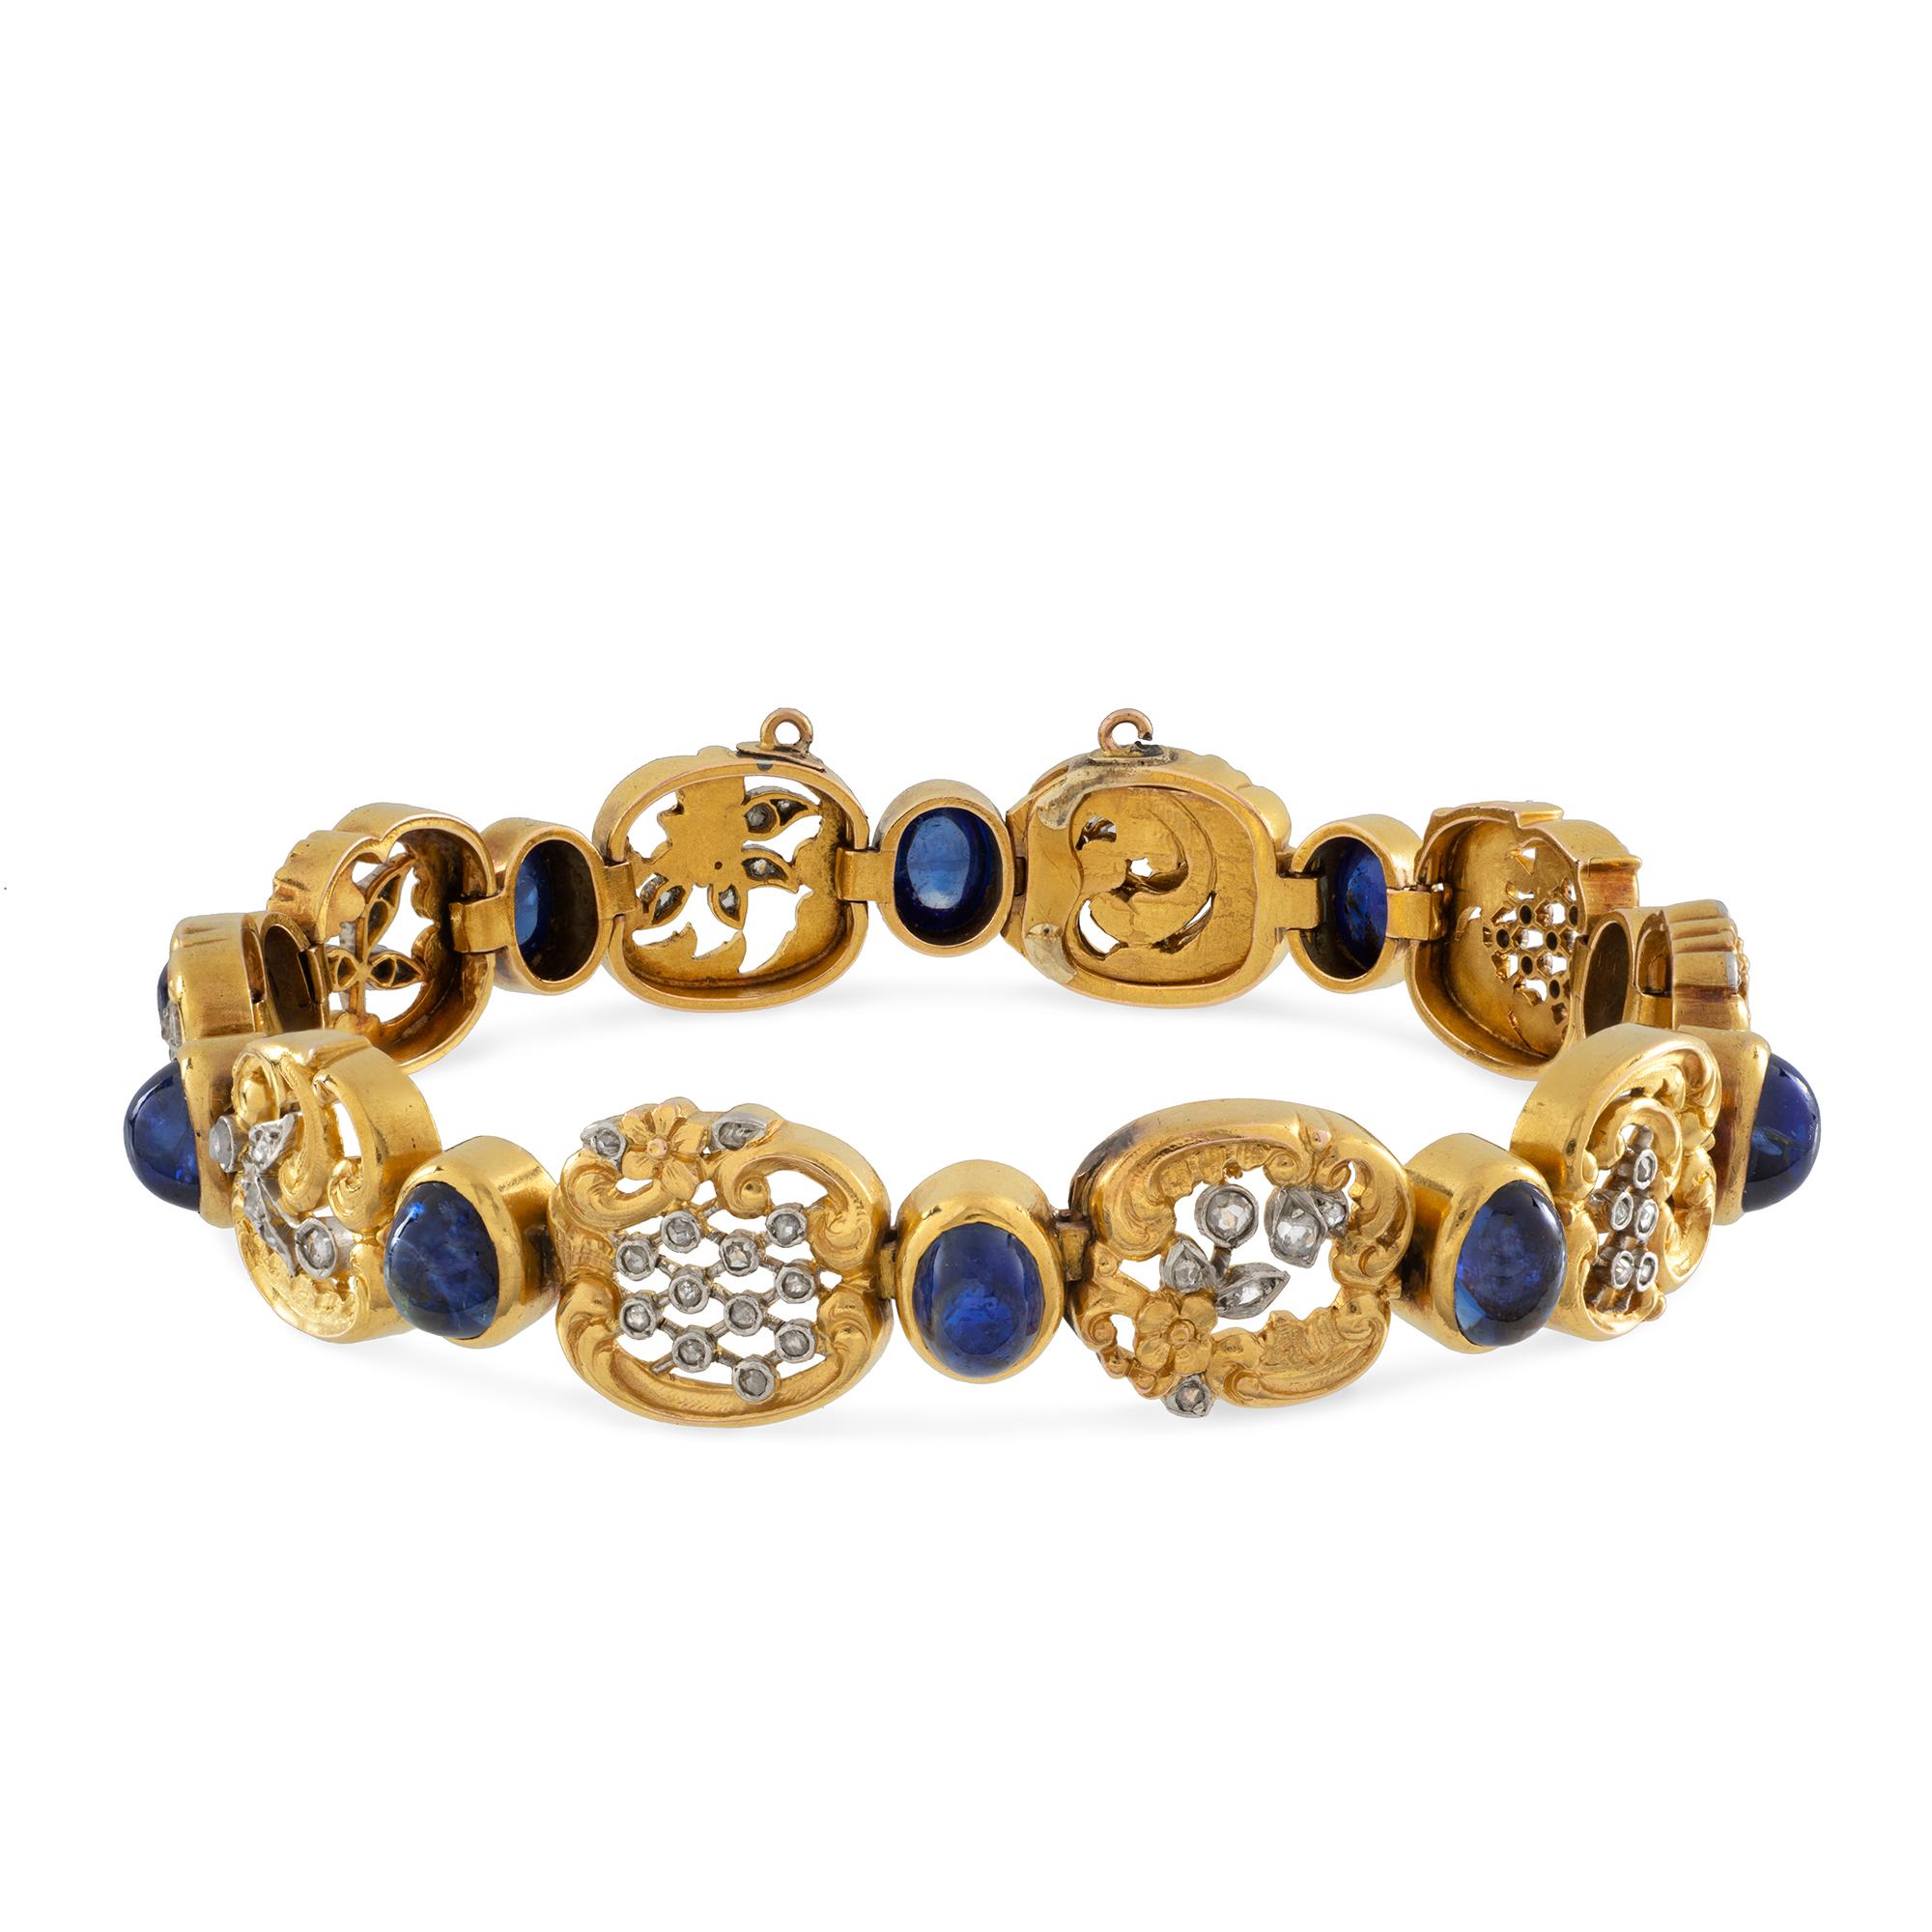 A Belle Epoque sapphire and diamond bracelet, consisting of ten openwork gold and platinum diamond-set carved plaques with foliate and scroll decorations, with ten oval cabochon sapphires with approximate total weight 5 carats rub-over set